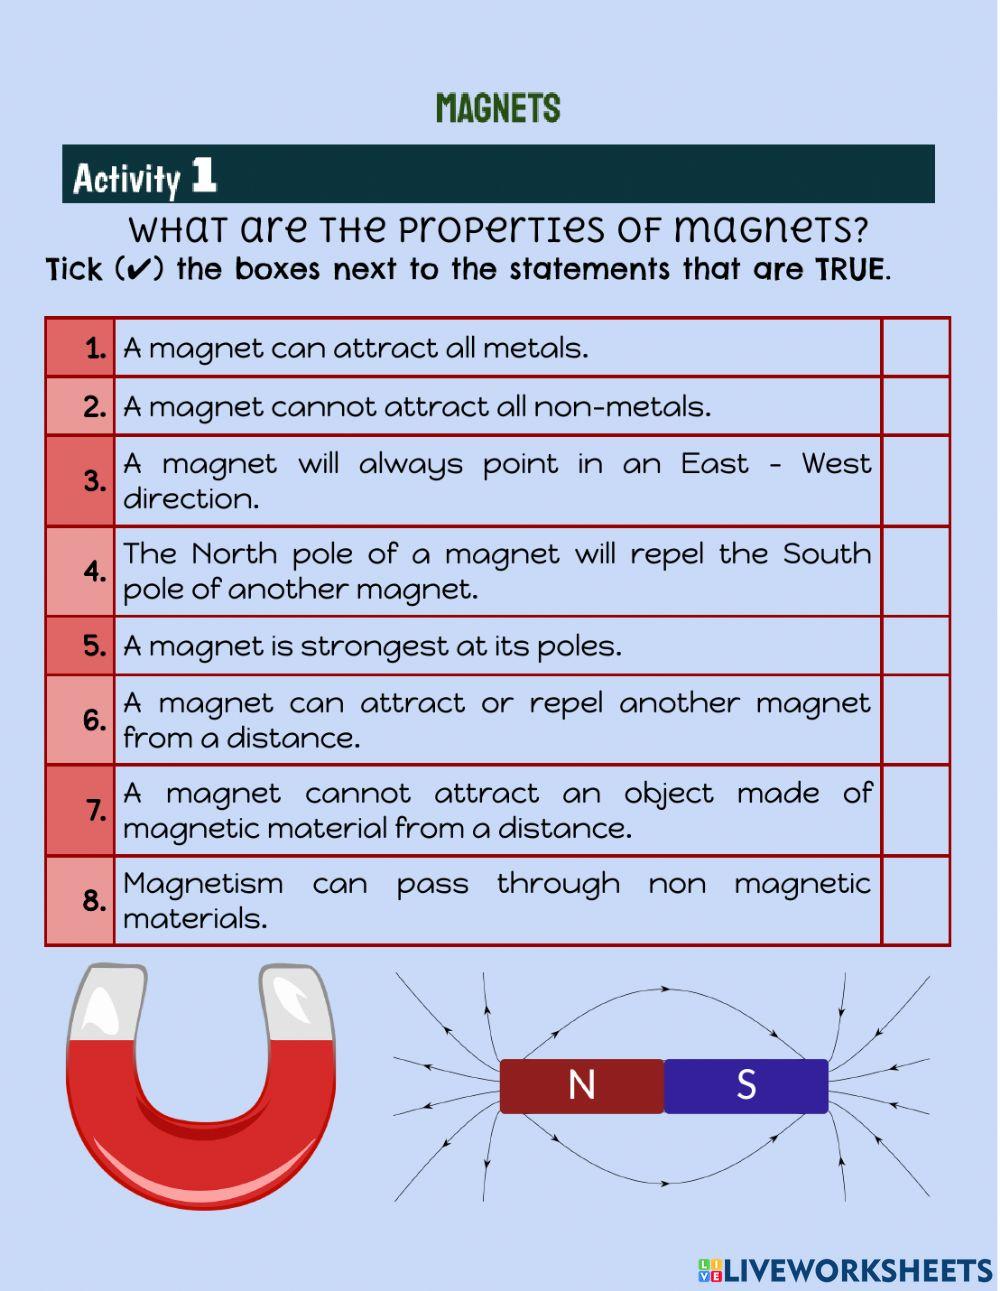 What are the properties of magnets?